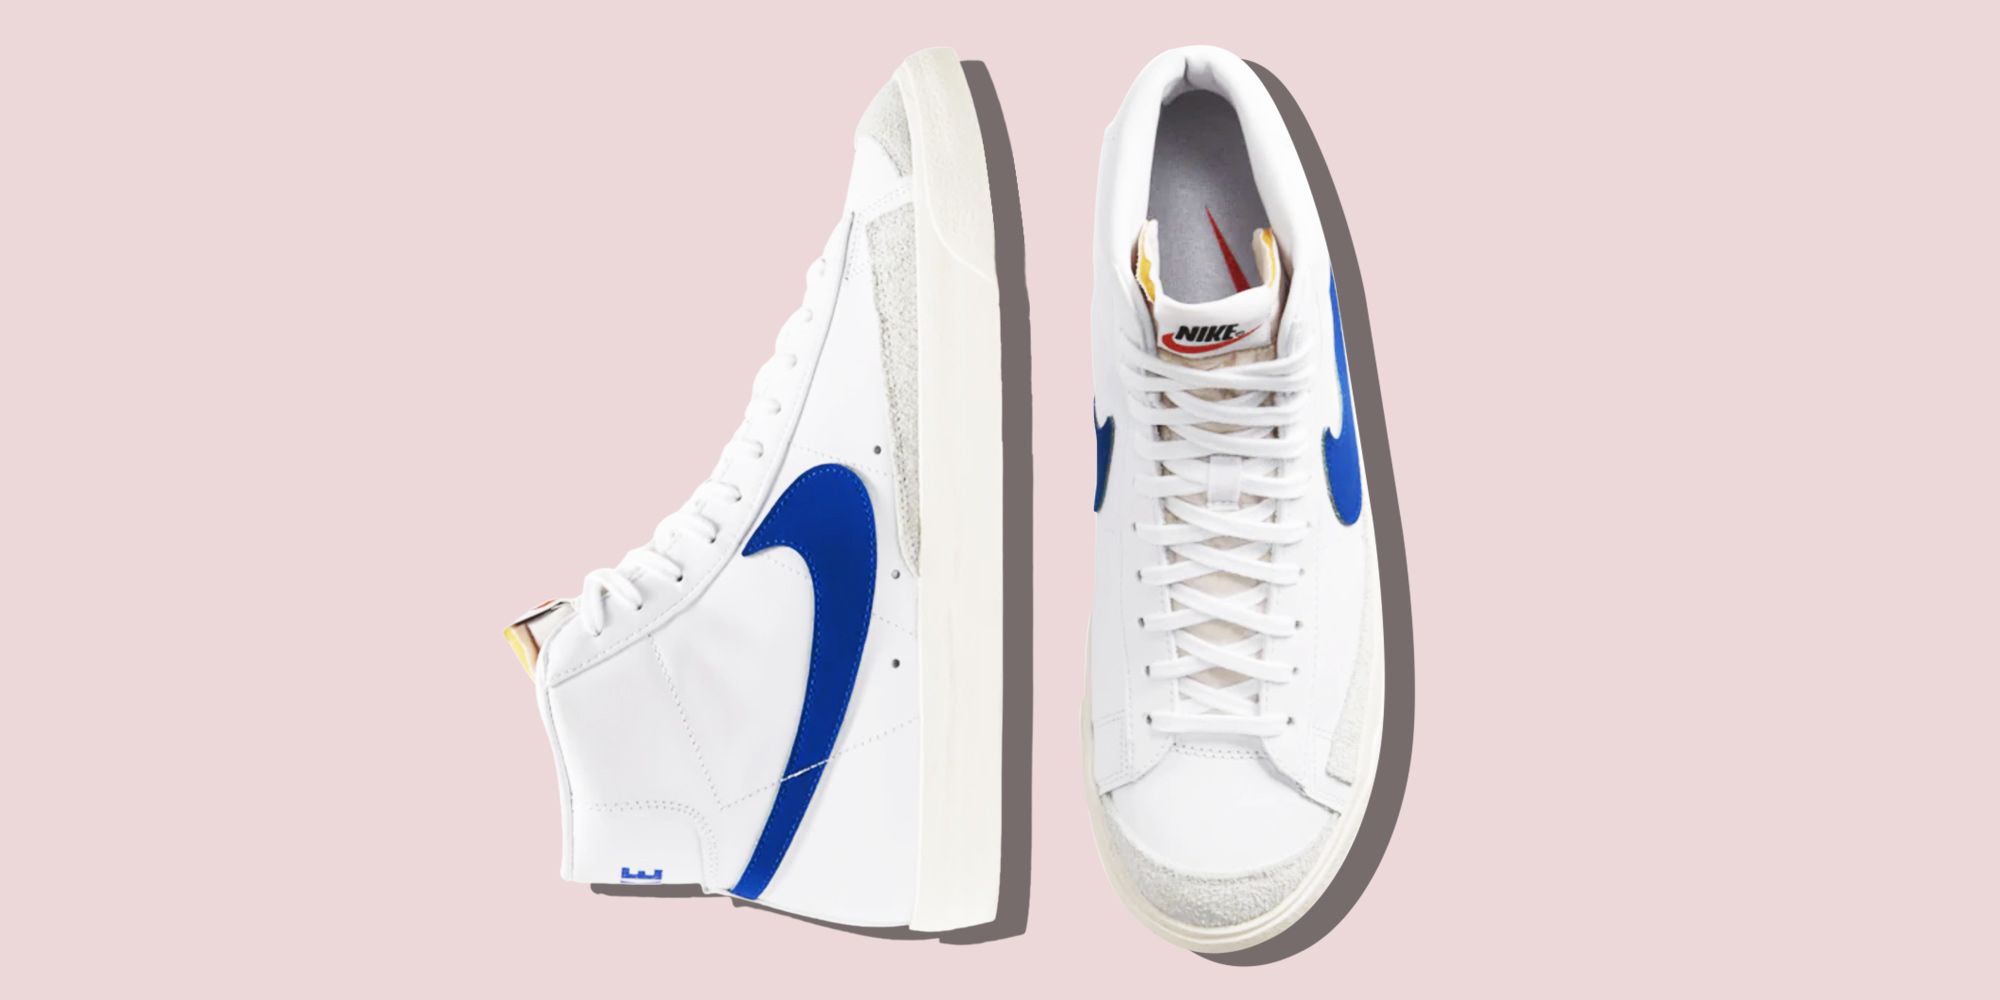 white high top mens shoes